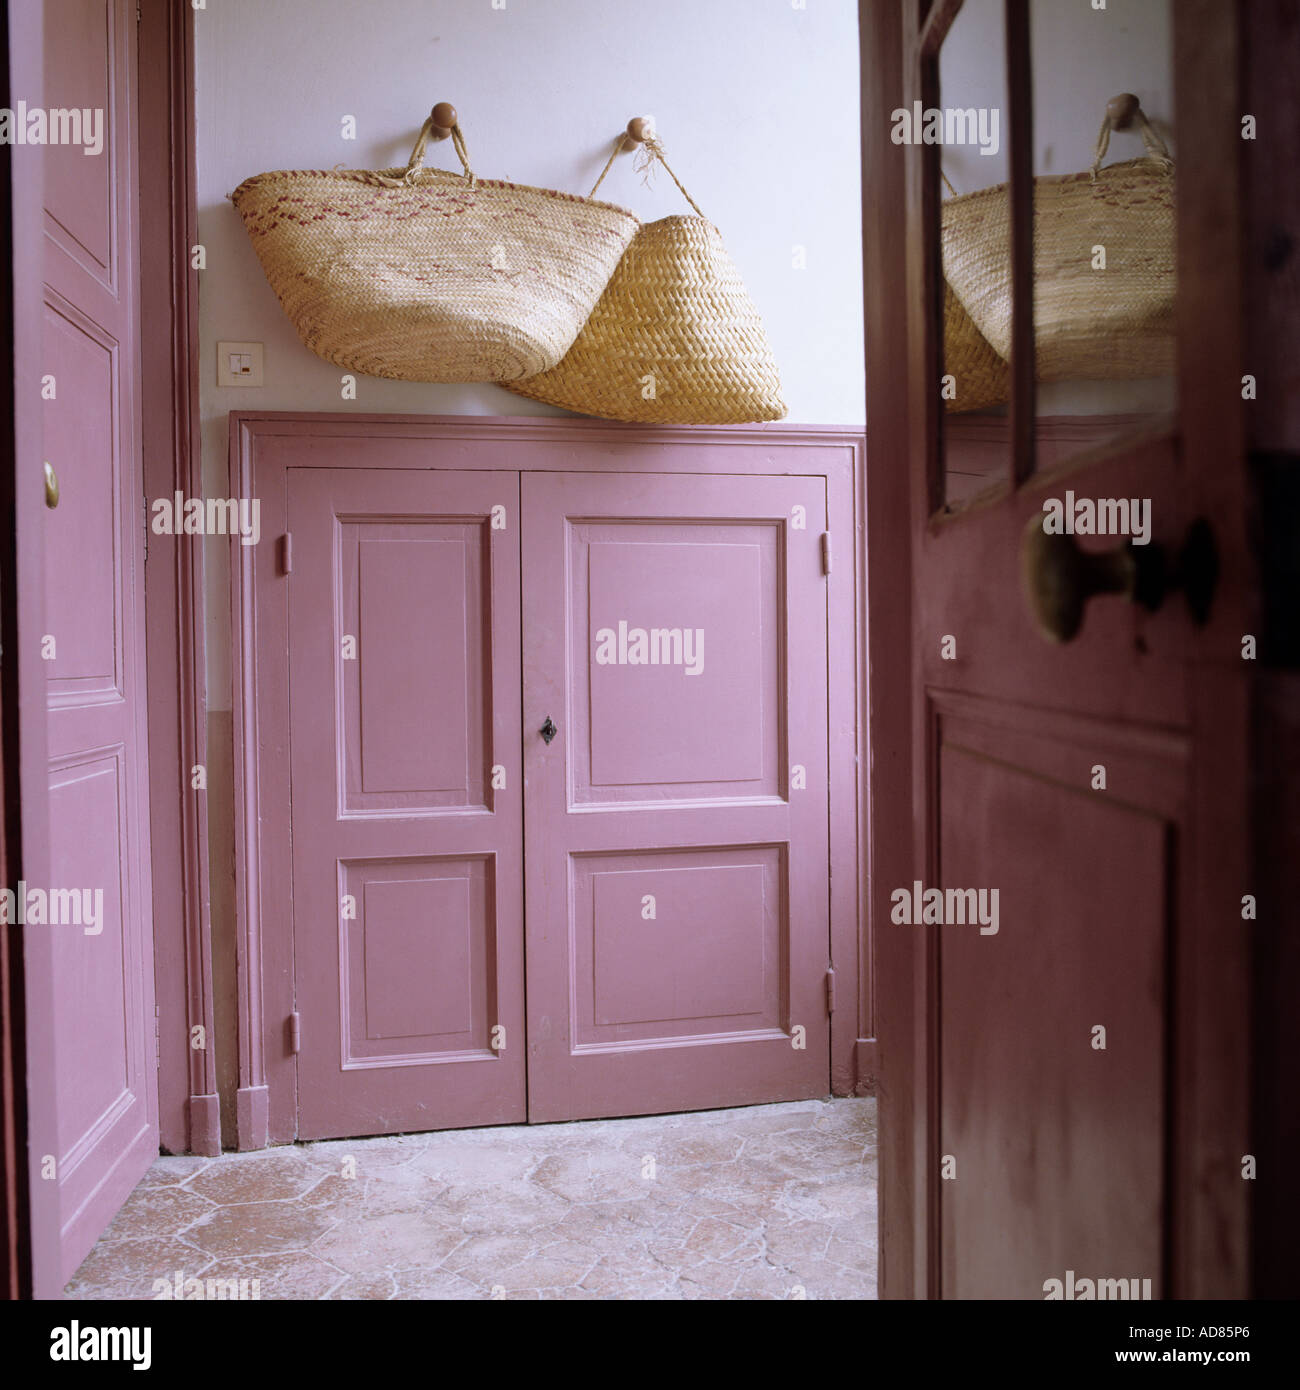 Country house entrance with pink panelling and straw baskets Stock Photo